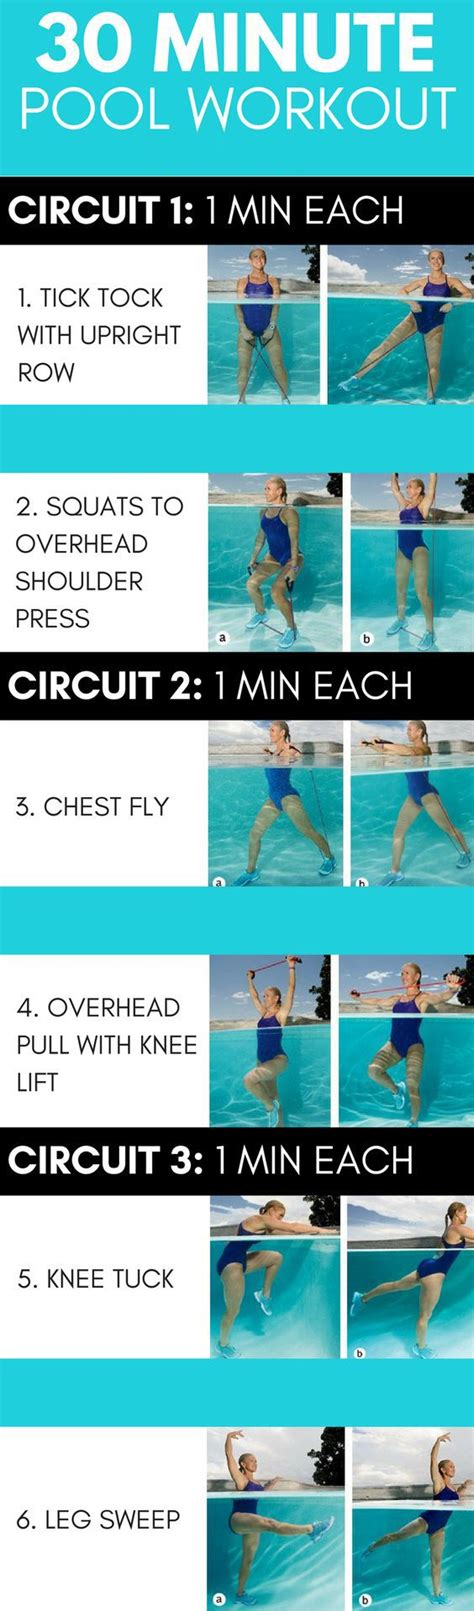 30 Min Water Workout Posted By Pool Workout Swimming Pool